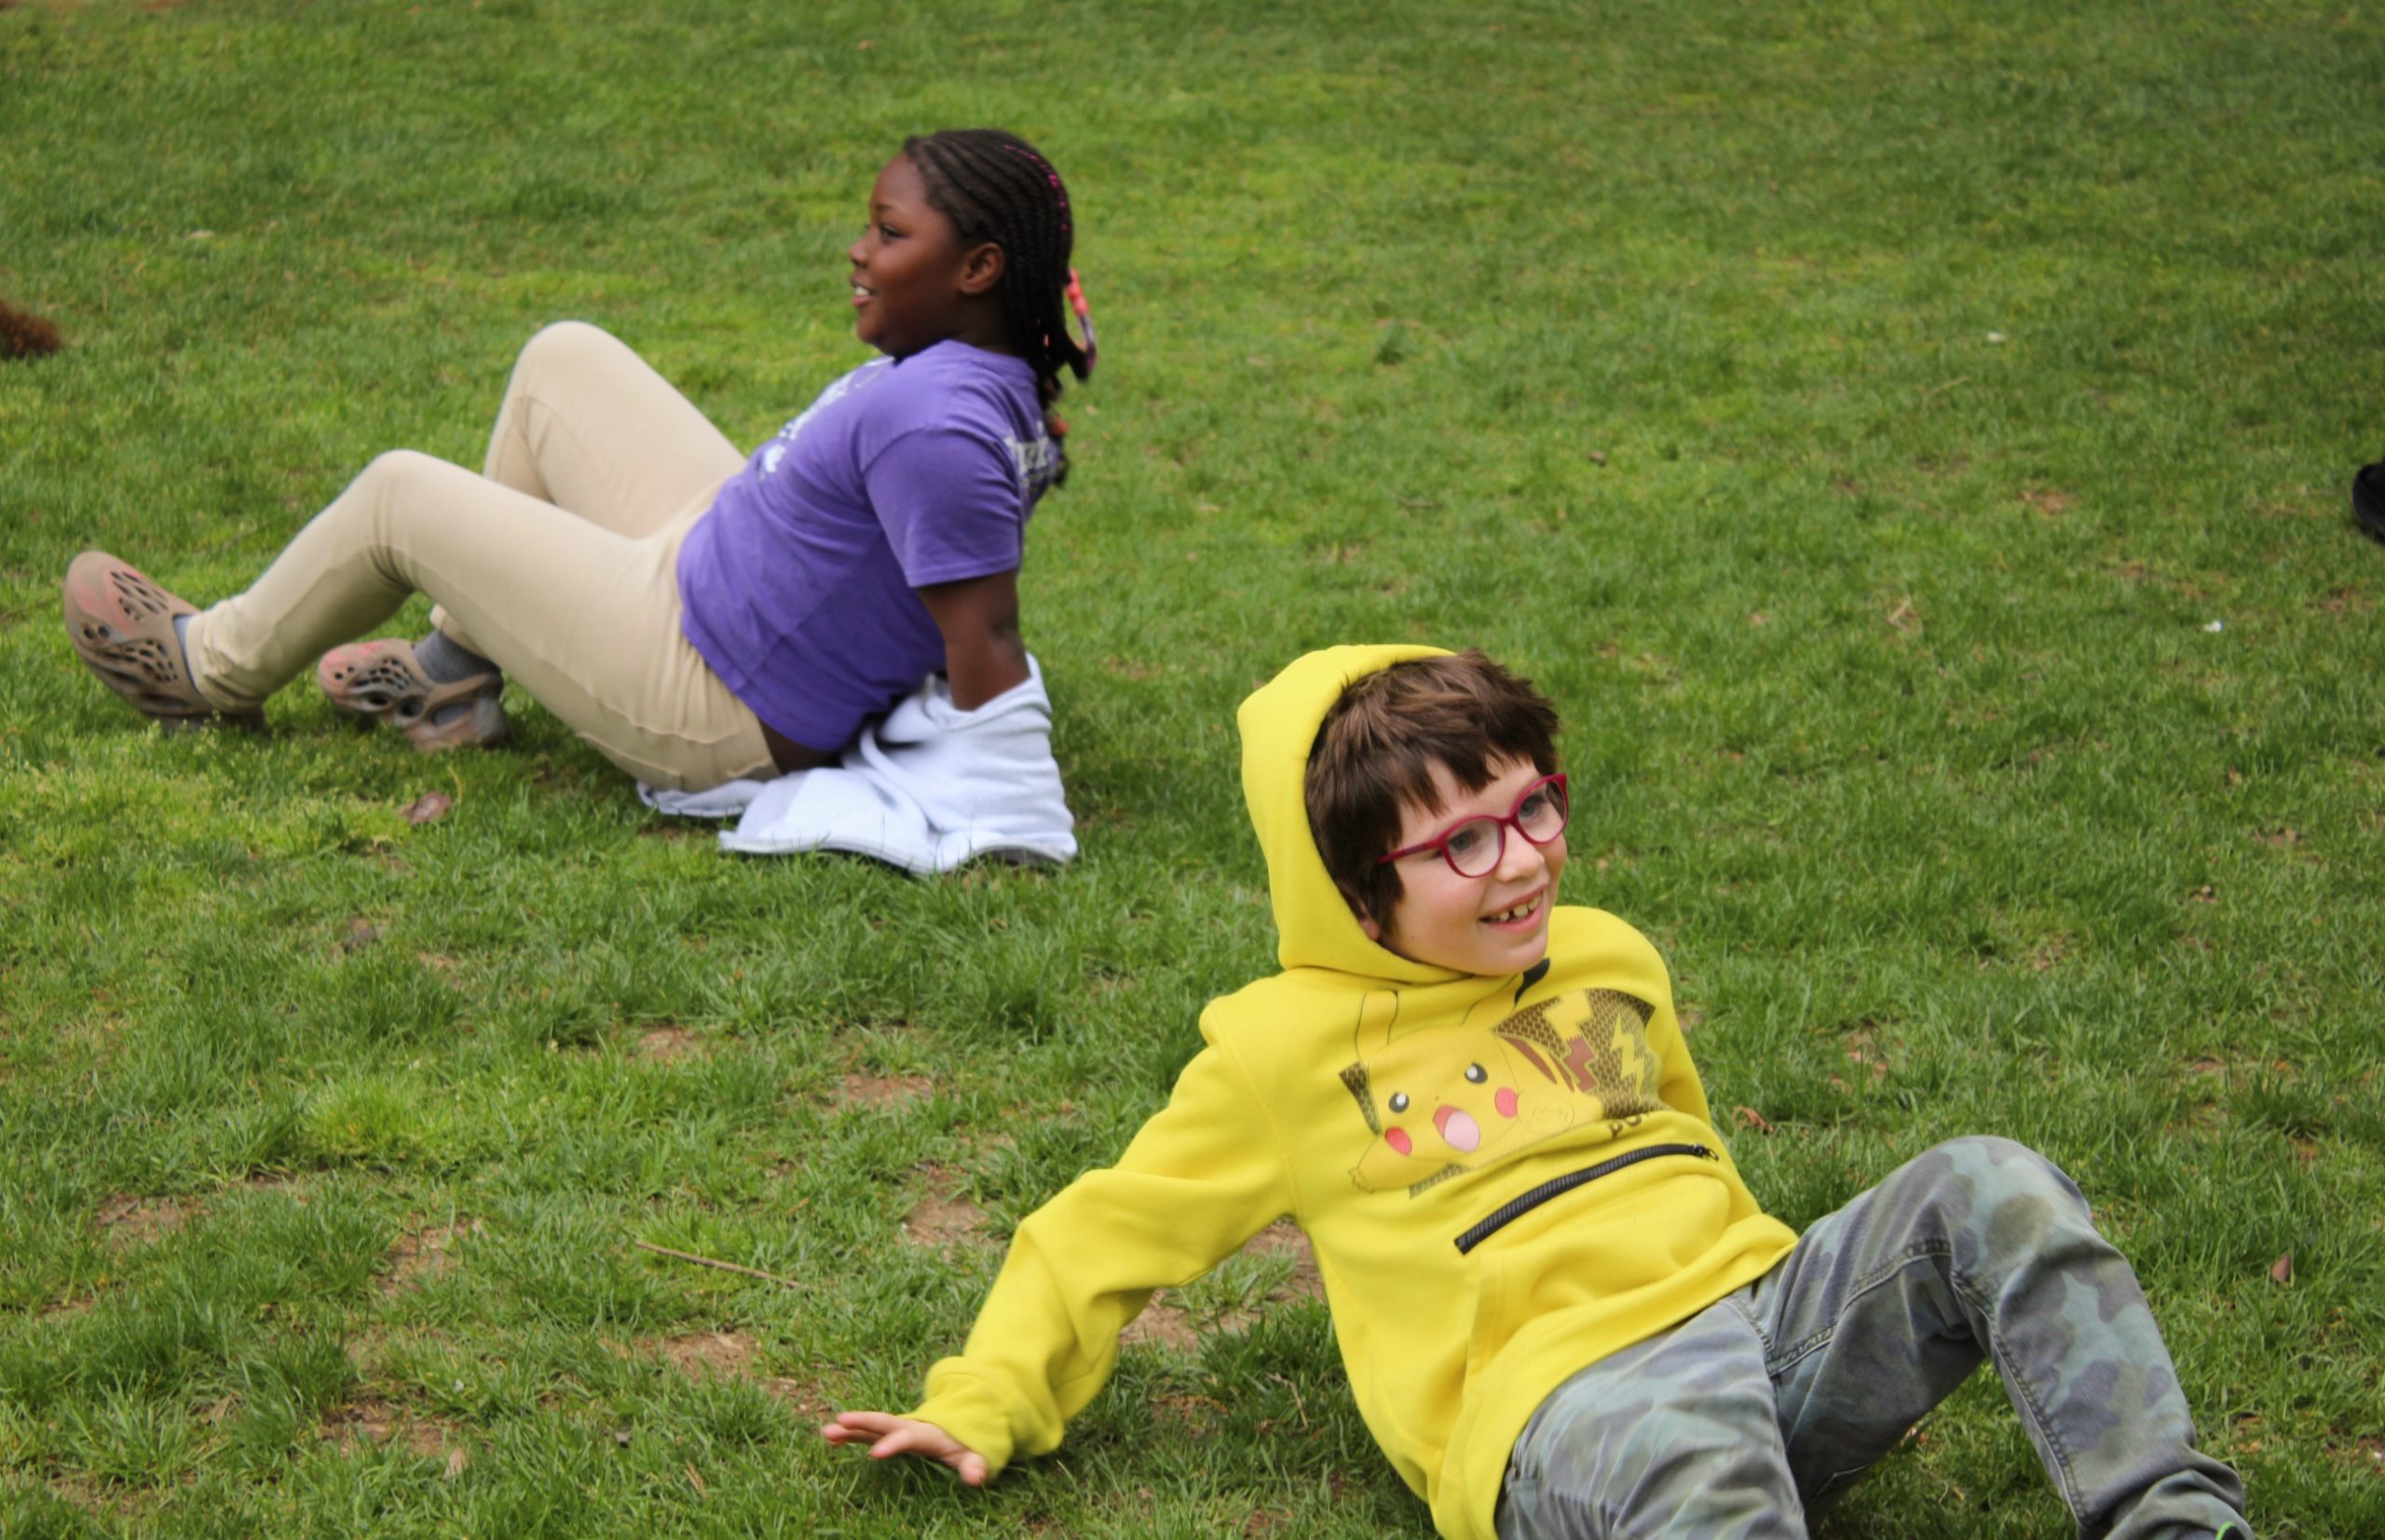 Kids crab-walking smiling. two tutees with a yellow pikachu jacket and purple t-shirt at the 2023 field day